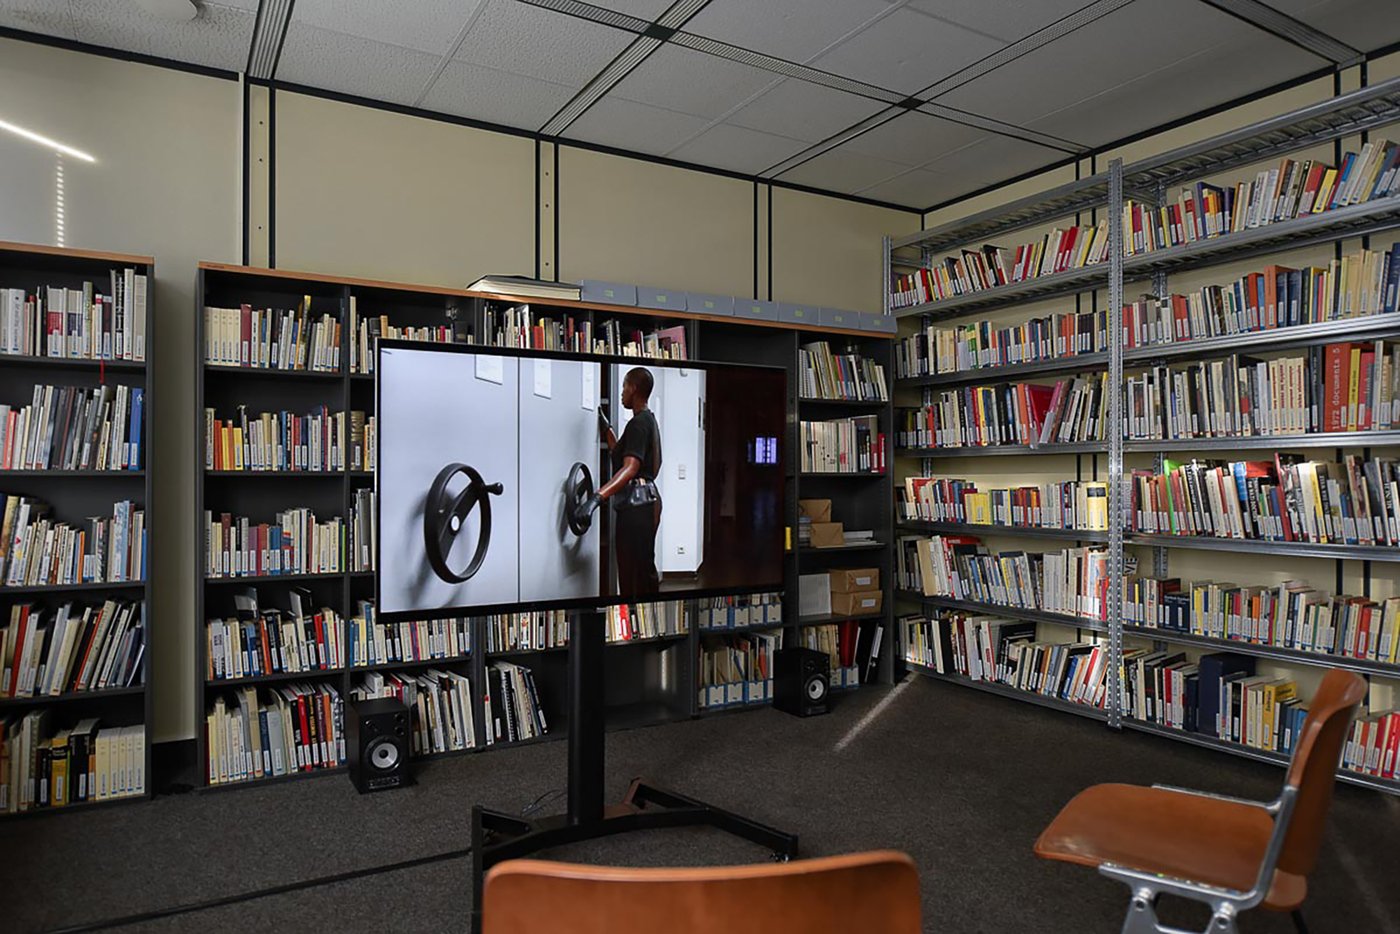 View of the exhibition in the archive room. In the background bookshelves, in front of them a free-standing monitor on which a video is running. On the freeze frame you can see a person operating the turning wheel of an archive shelf and looking into the gap between two shelves.